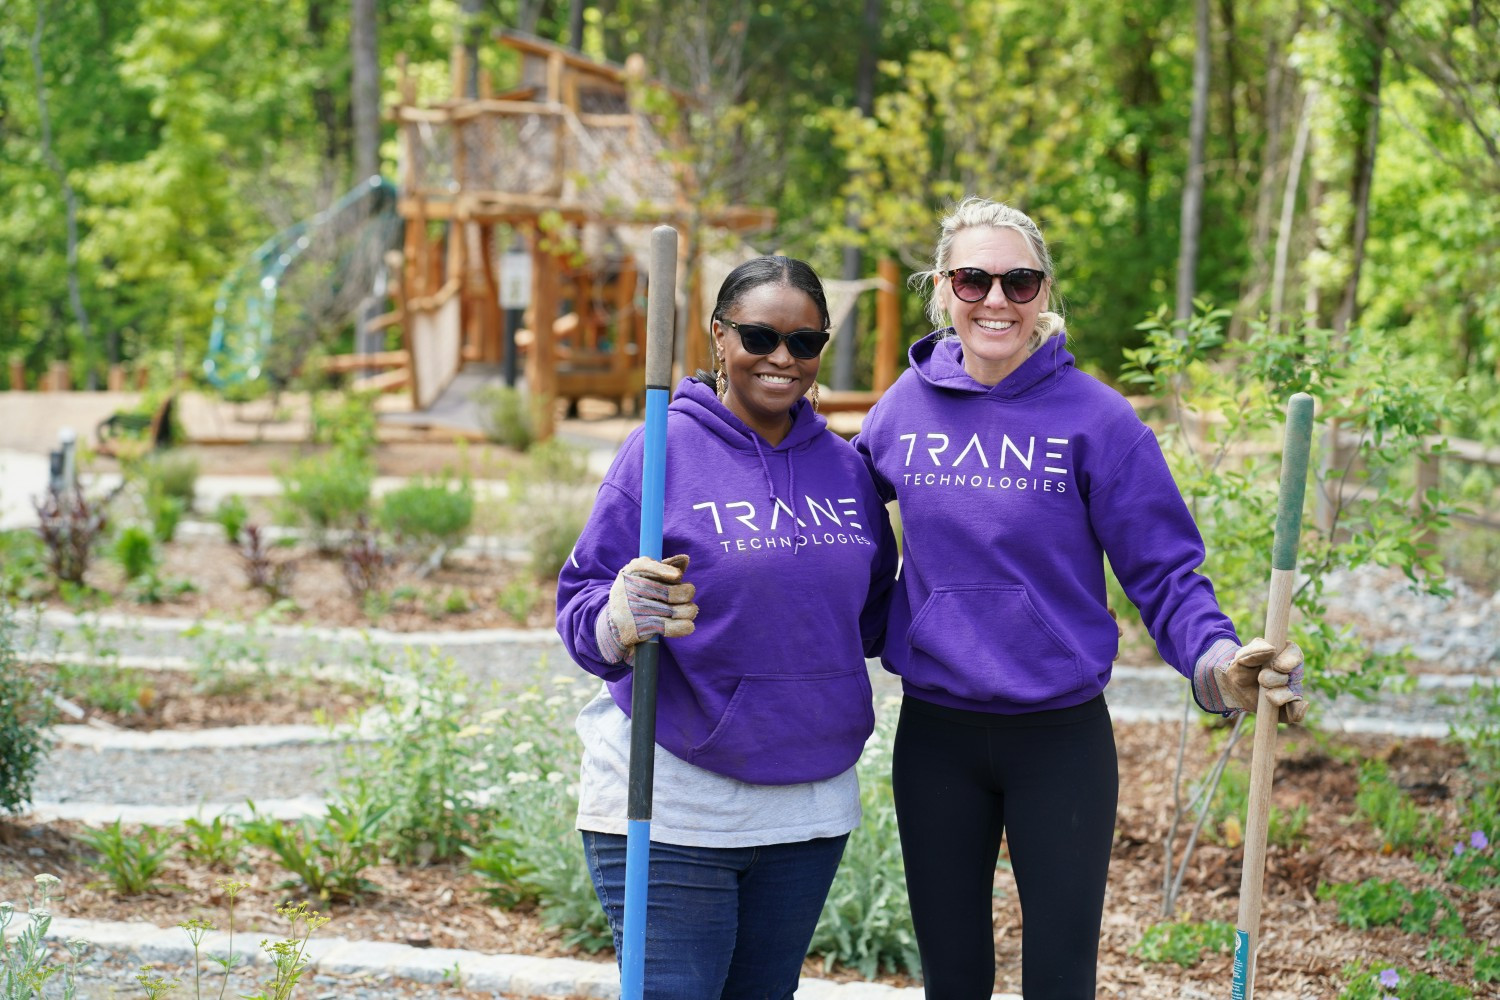 Trane Technologies employees enjoy the walking trails at the company's North American headquarters in Davidson, NC